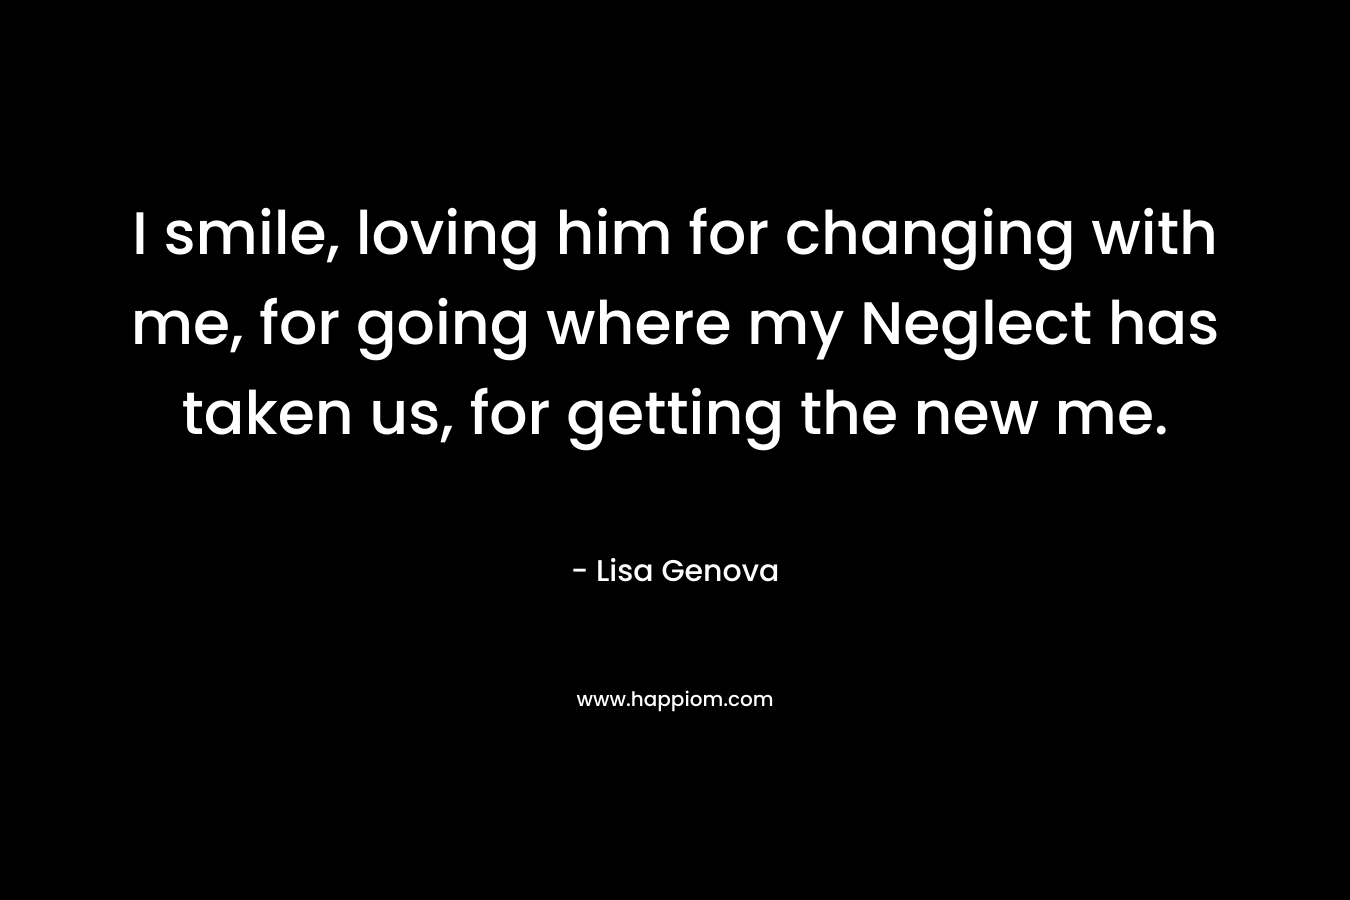 I smile, loving him for changing with me, for going where my Neglect has taken us, for getting the new me. – Lisa Genova